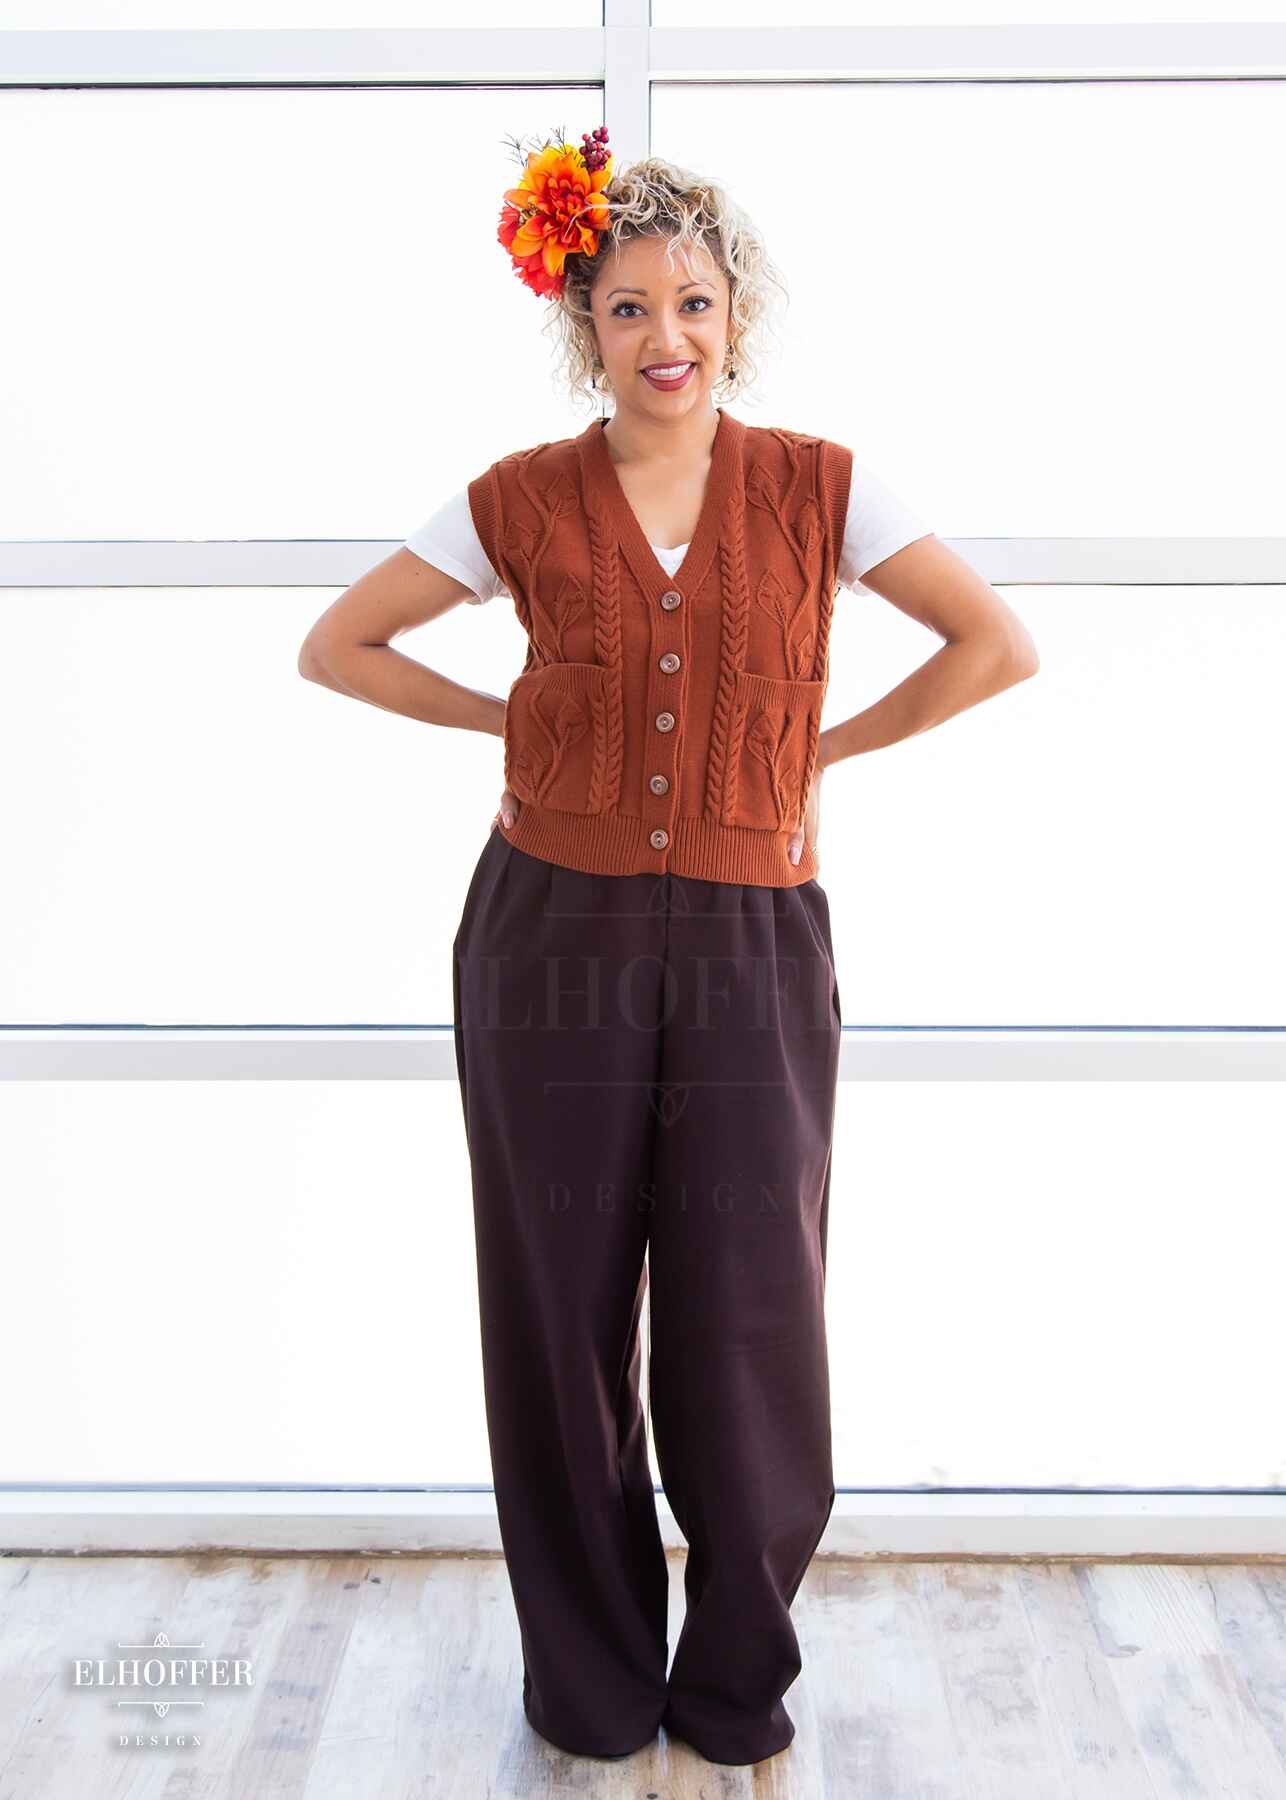 Simone, a light olive skinned S model with short curly platinum blonde hair, is smiling while wearing a pumpkin orange button up knit vest with a leafy vine and cable knit pattern, light brown buttons, and front pockets.